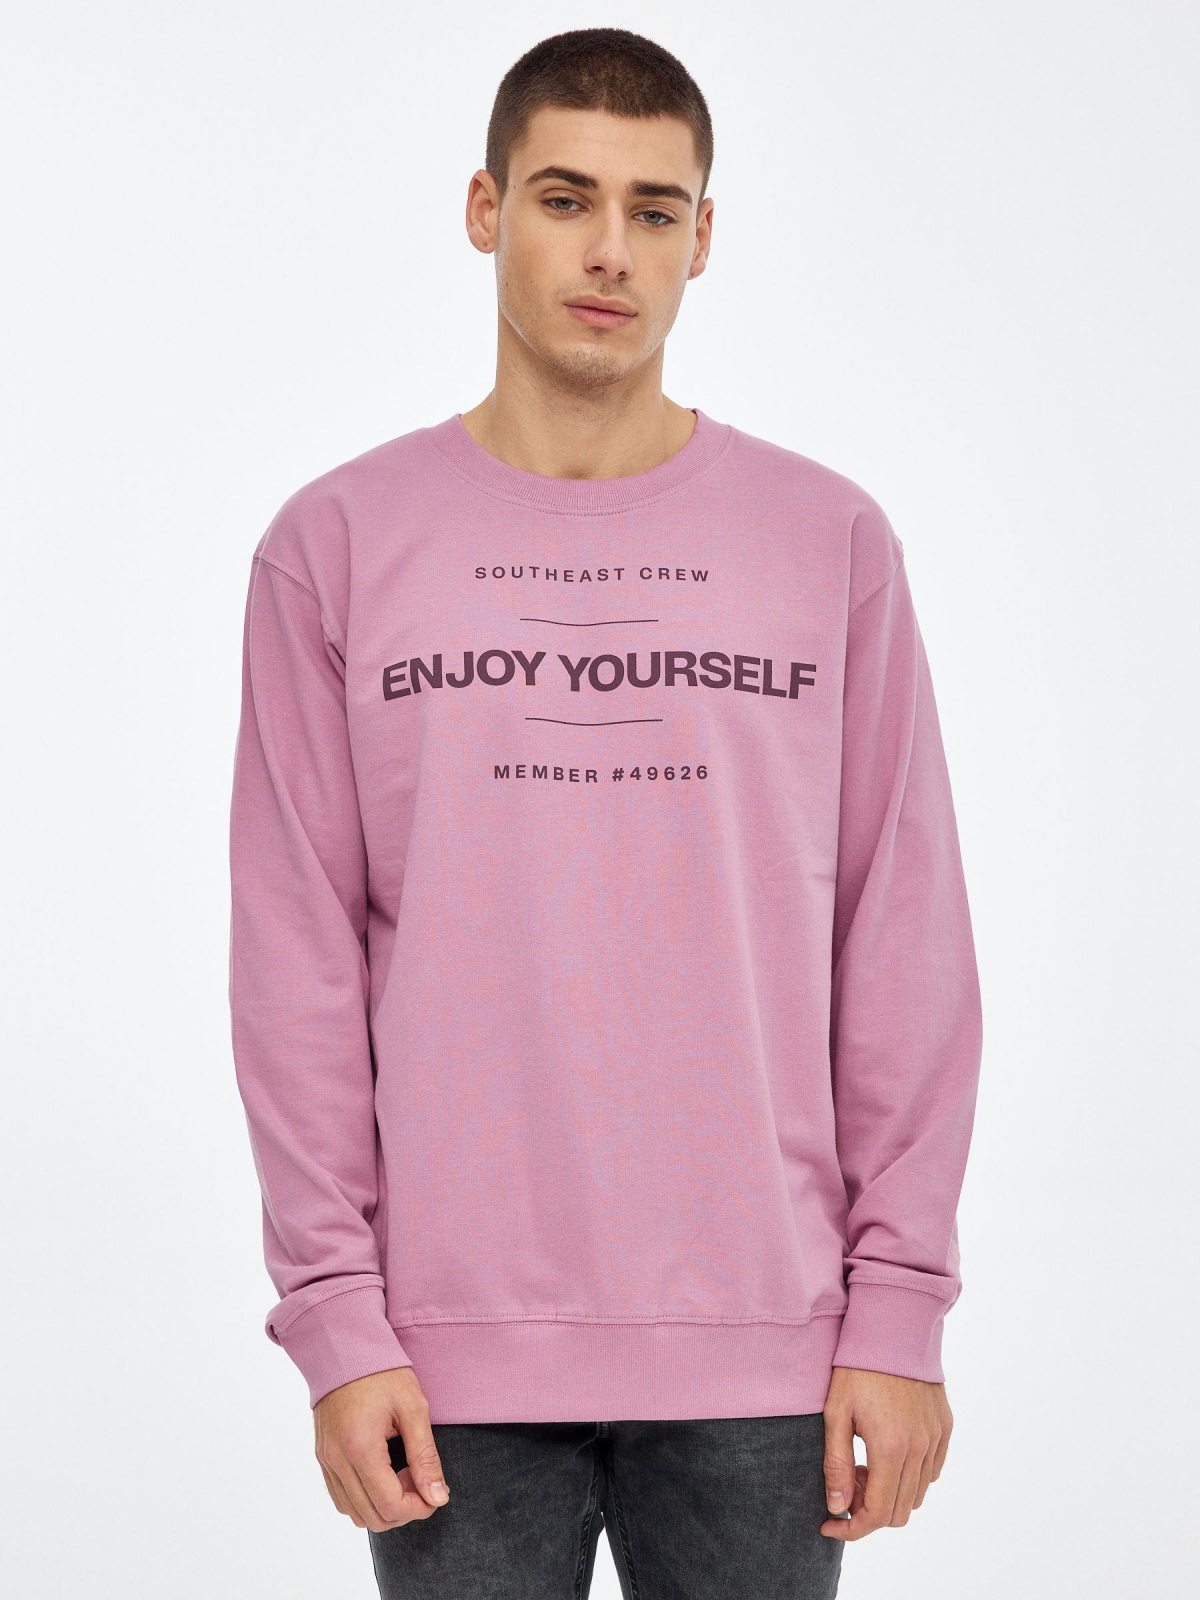 Enjoy Yourself basic Sweatshirt pink middle front view